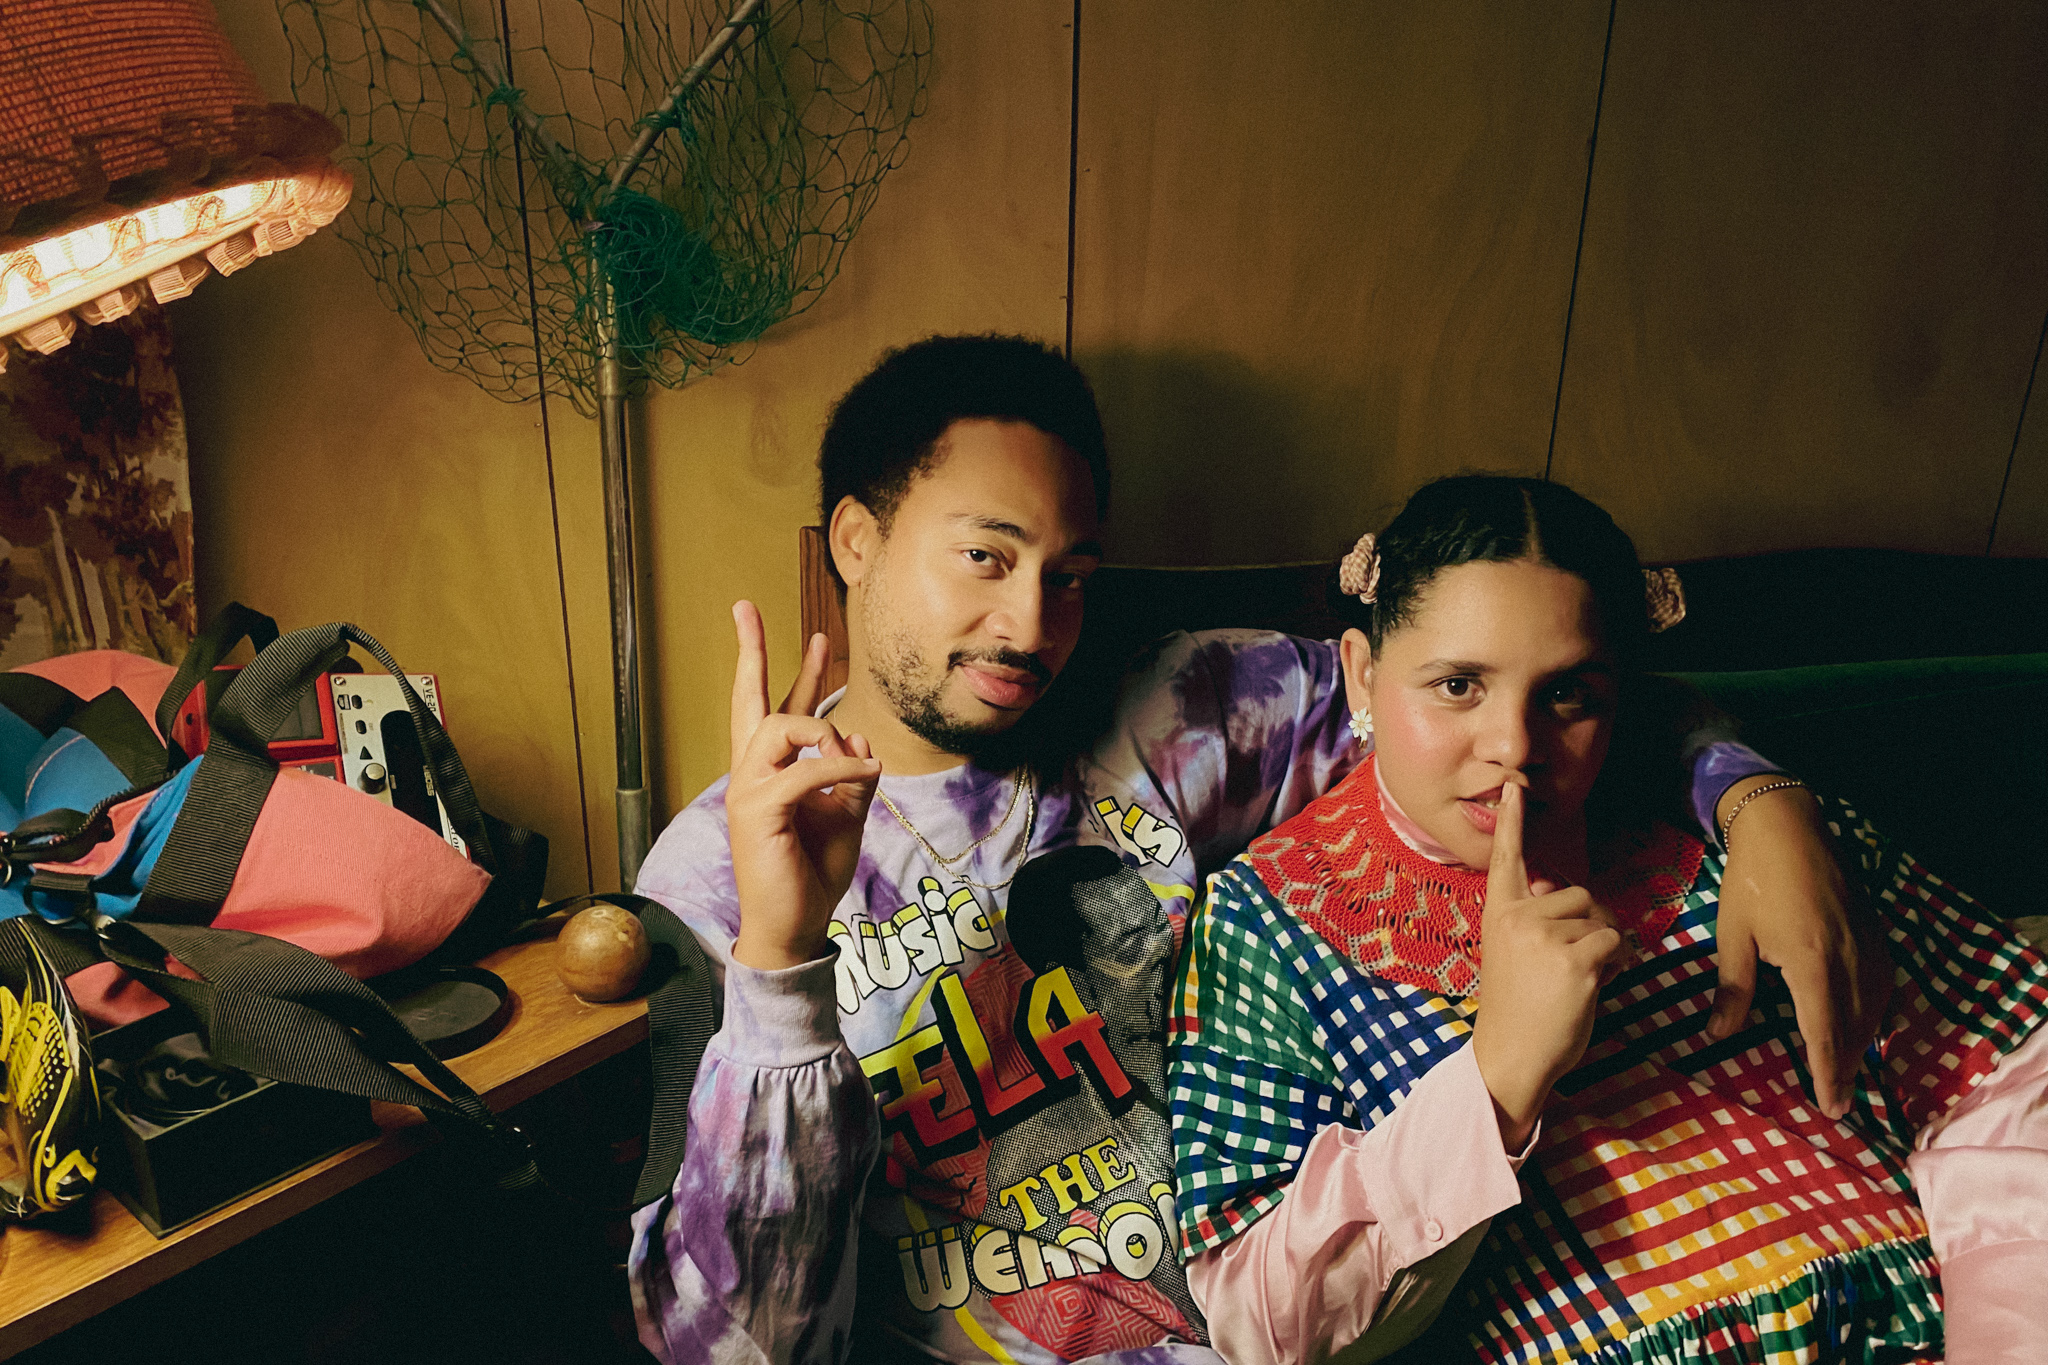 Cadence Weapon and Lido Pimienta